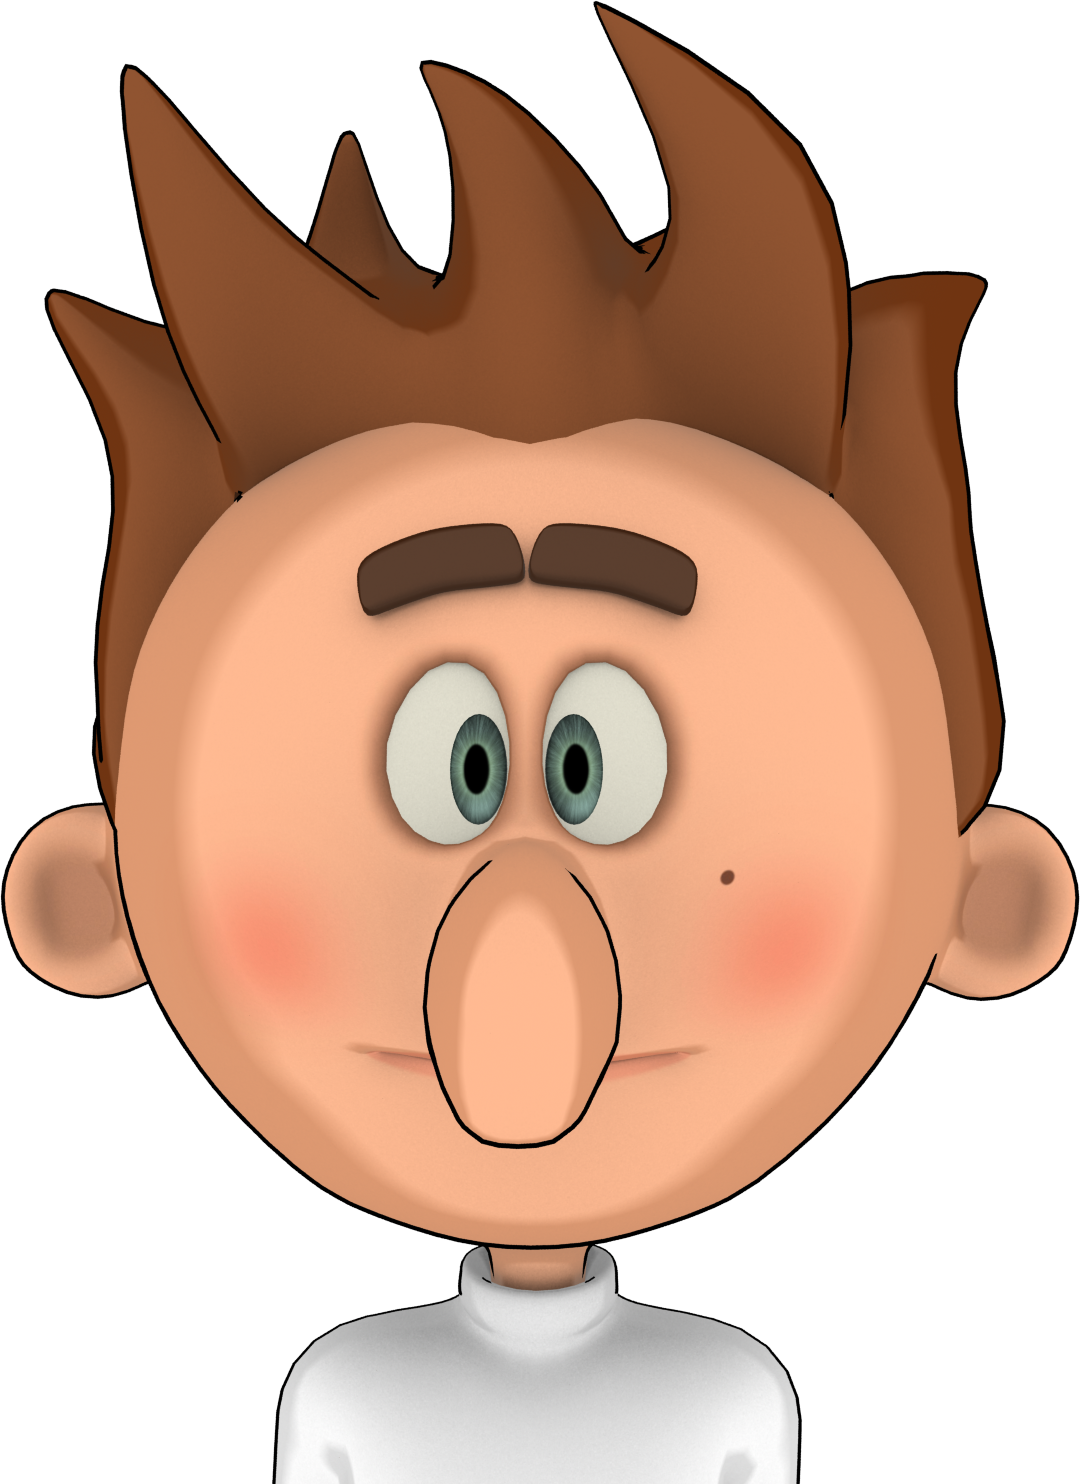 Funny face clipart